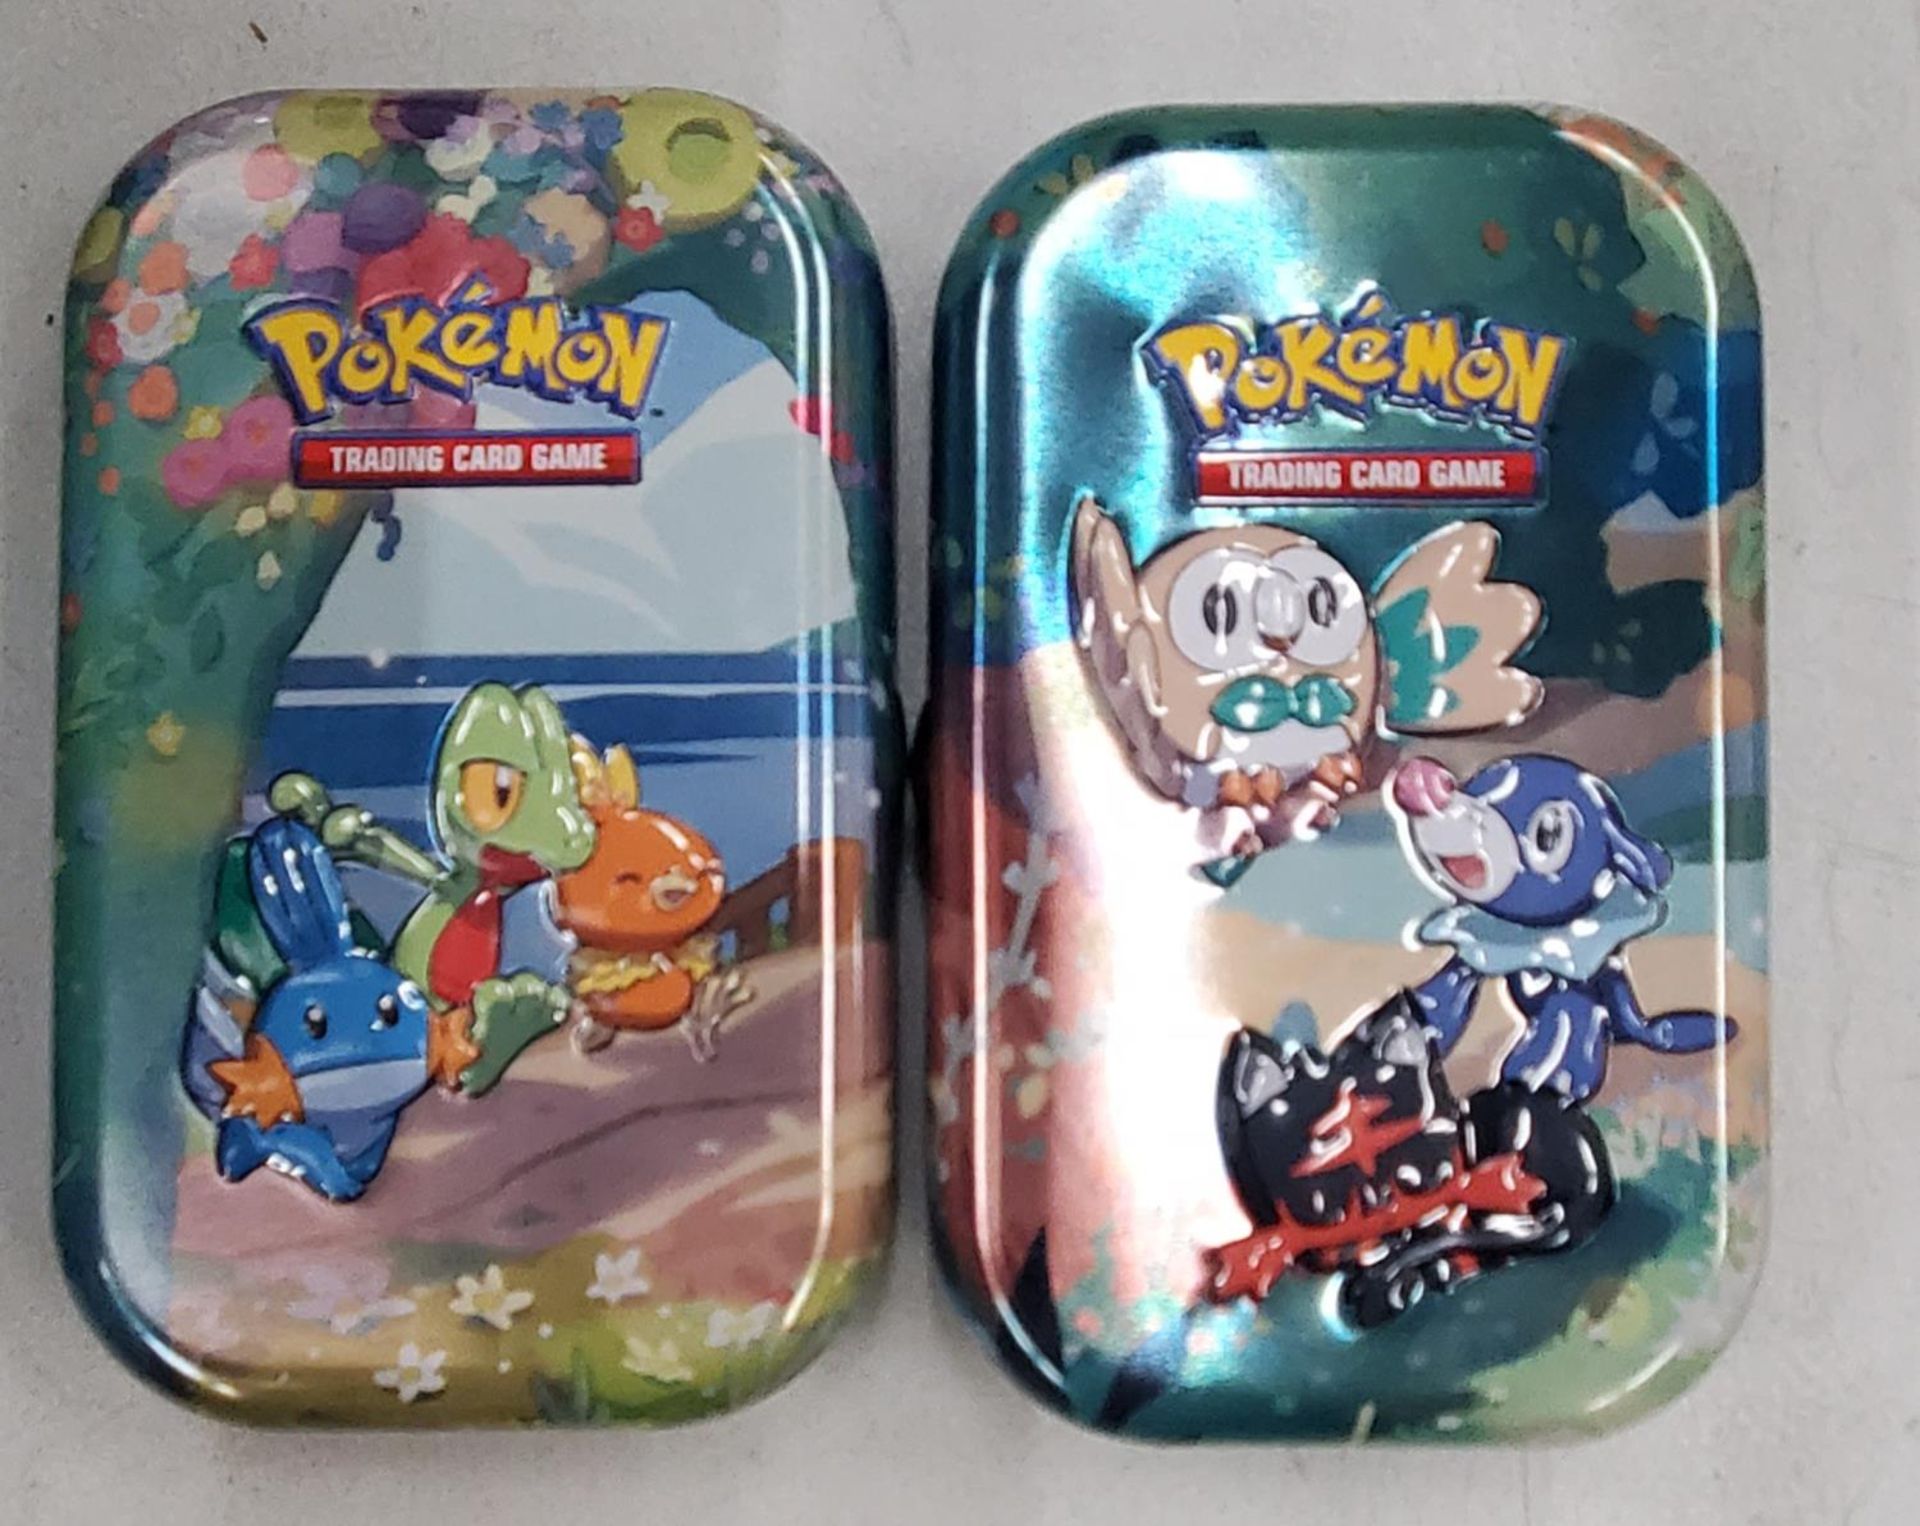 TWO TINS OF POKEMON CARDS INCLUDING HOLOS, ETC - 100+